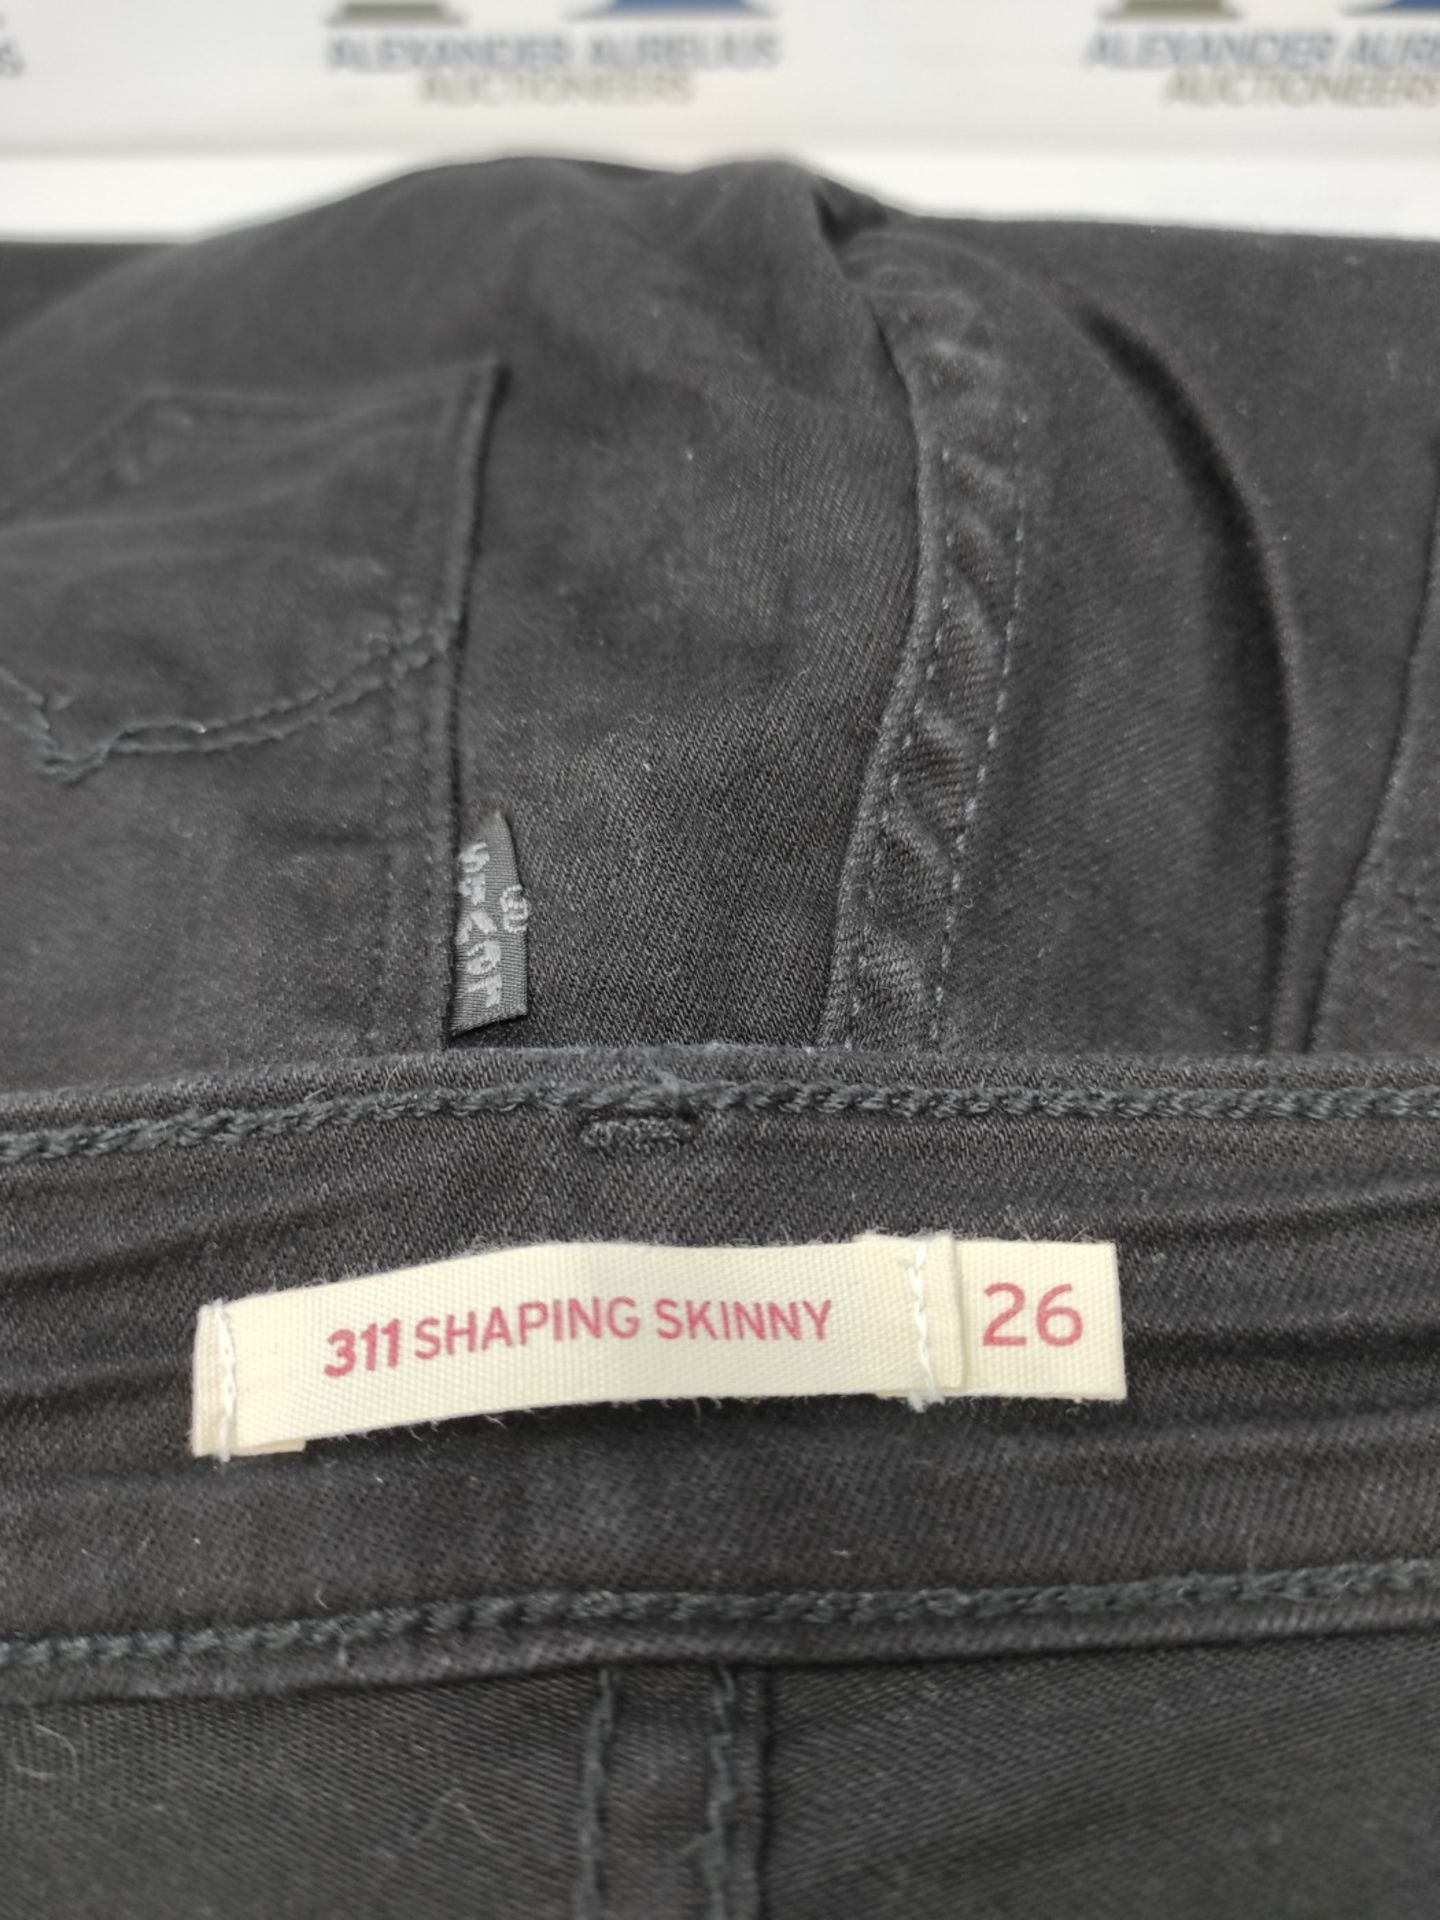 RRP £71.00 Levi's 311 Shaping Skinny Jeans for Women, Black and Black, 26W/30L - Image 3 of 3